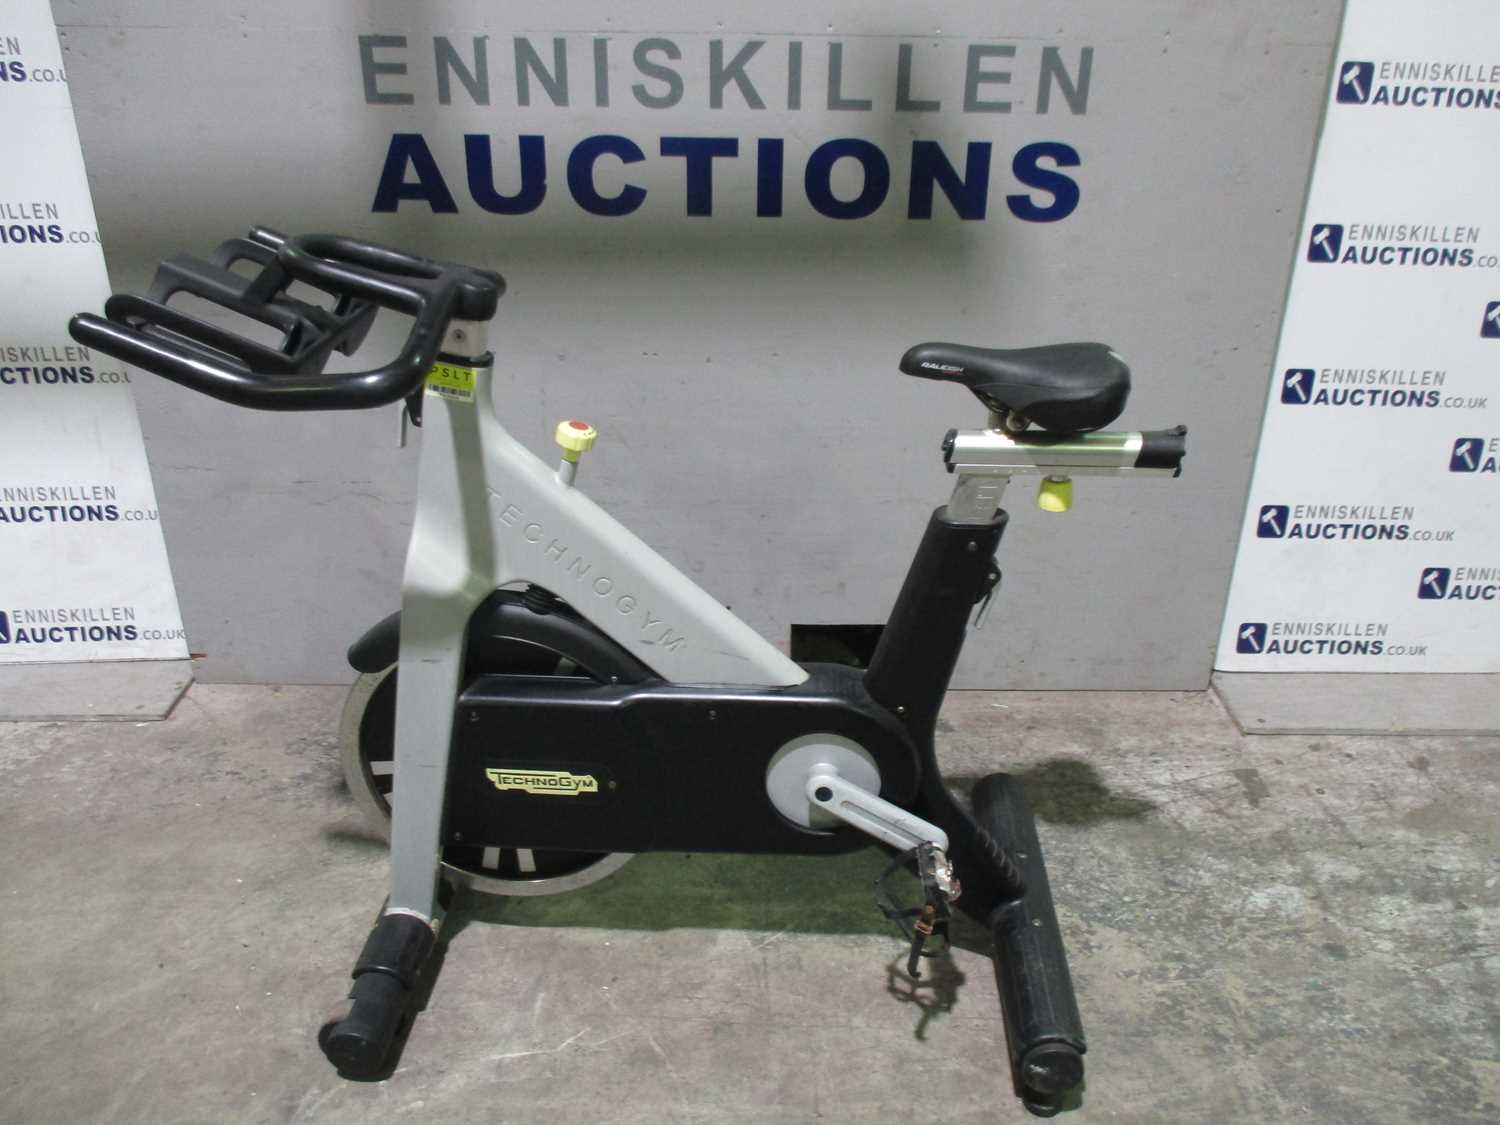 600 - TECHNOGYM SPINNING CYCLE